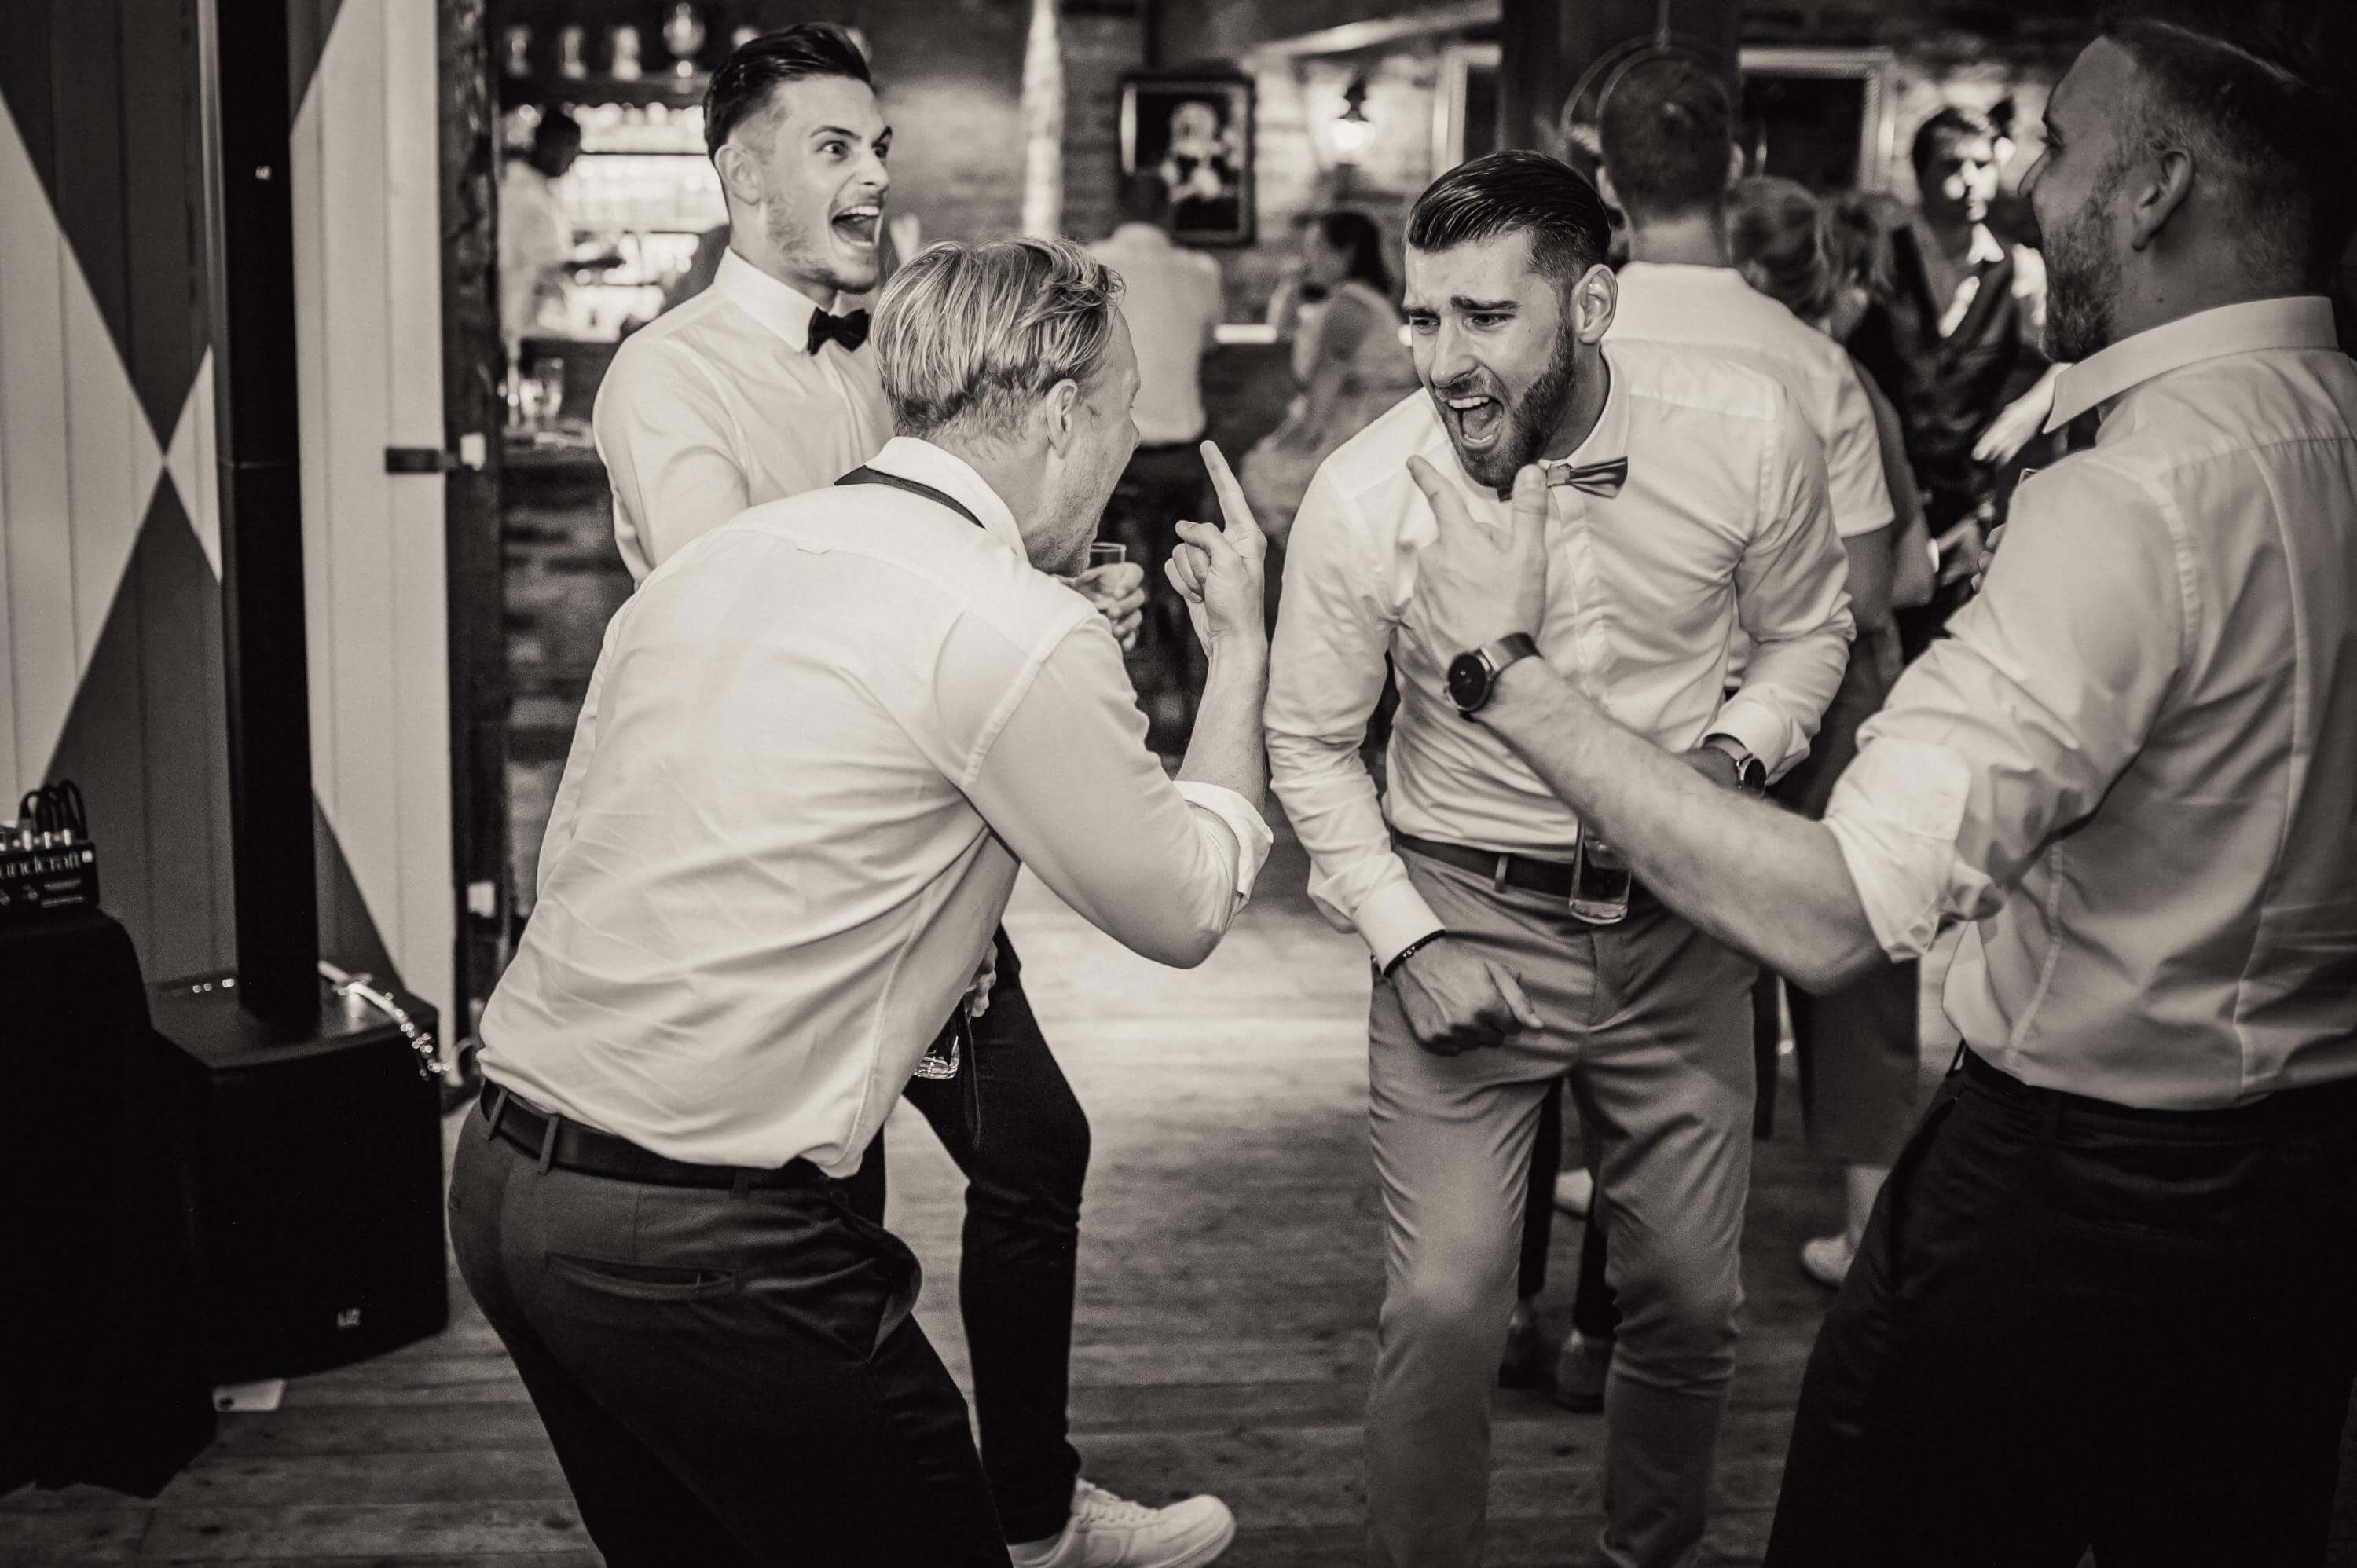 Extremely relaxed and excited, young men in light-colored shirts and with happy, aggressive facial expressions dance freely next to each other at a wedding.